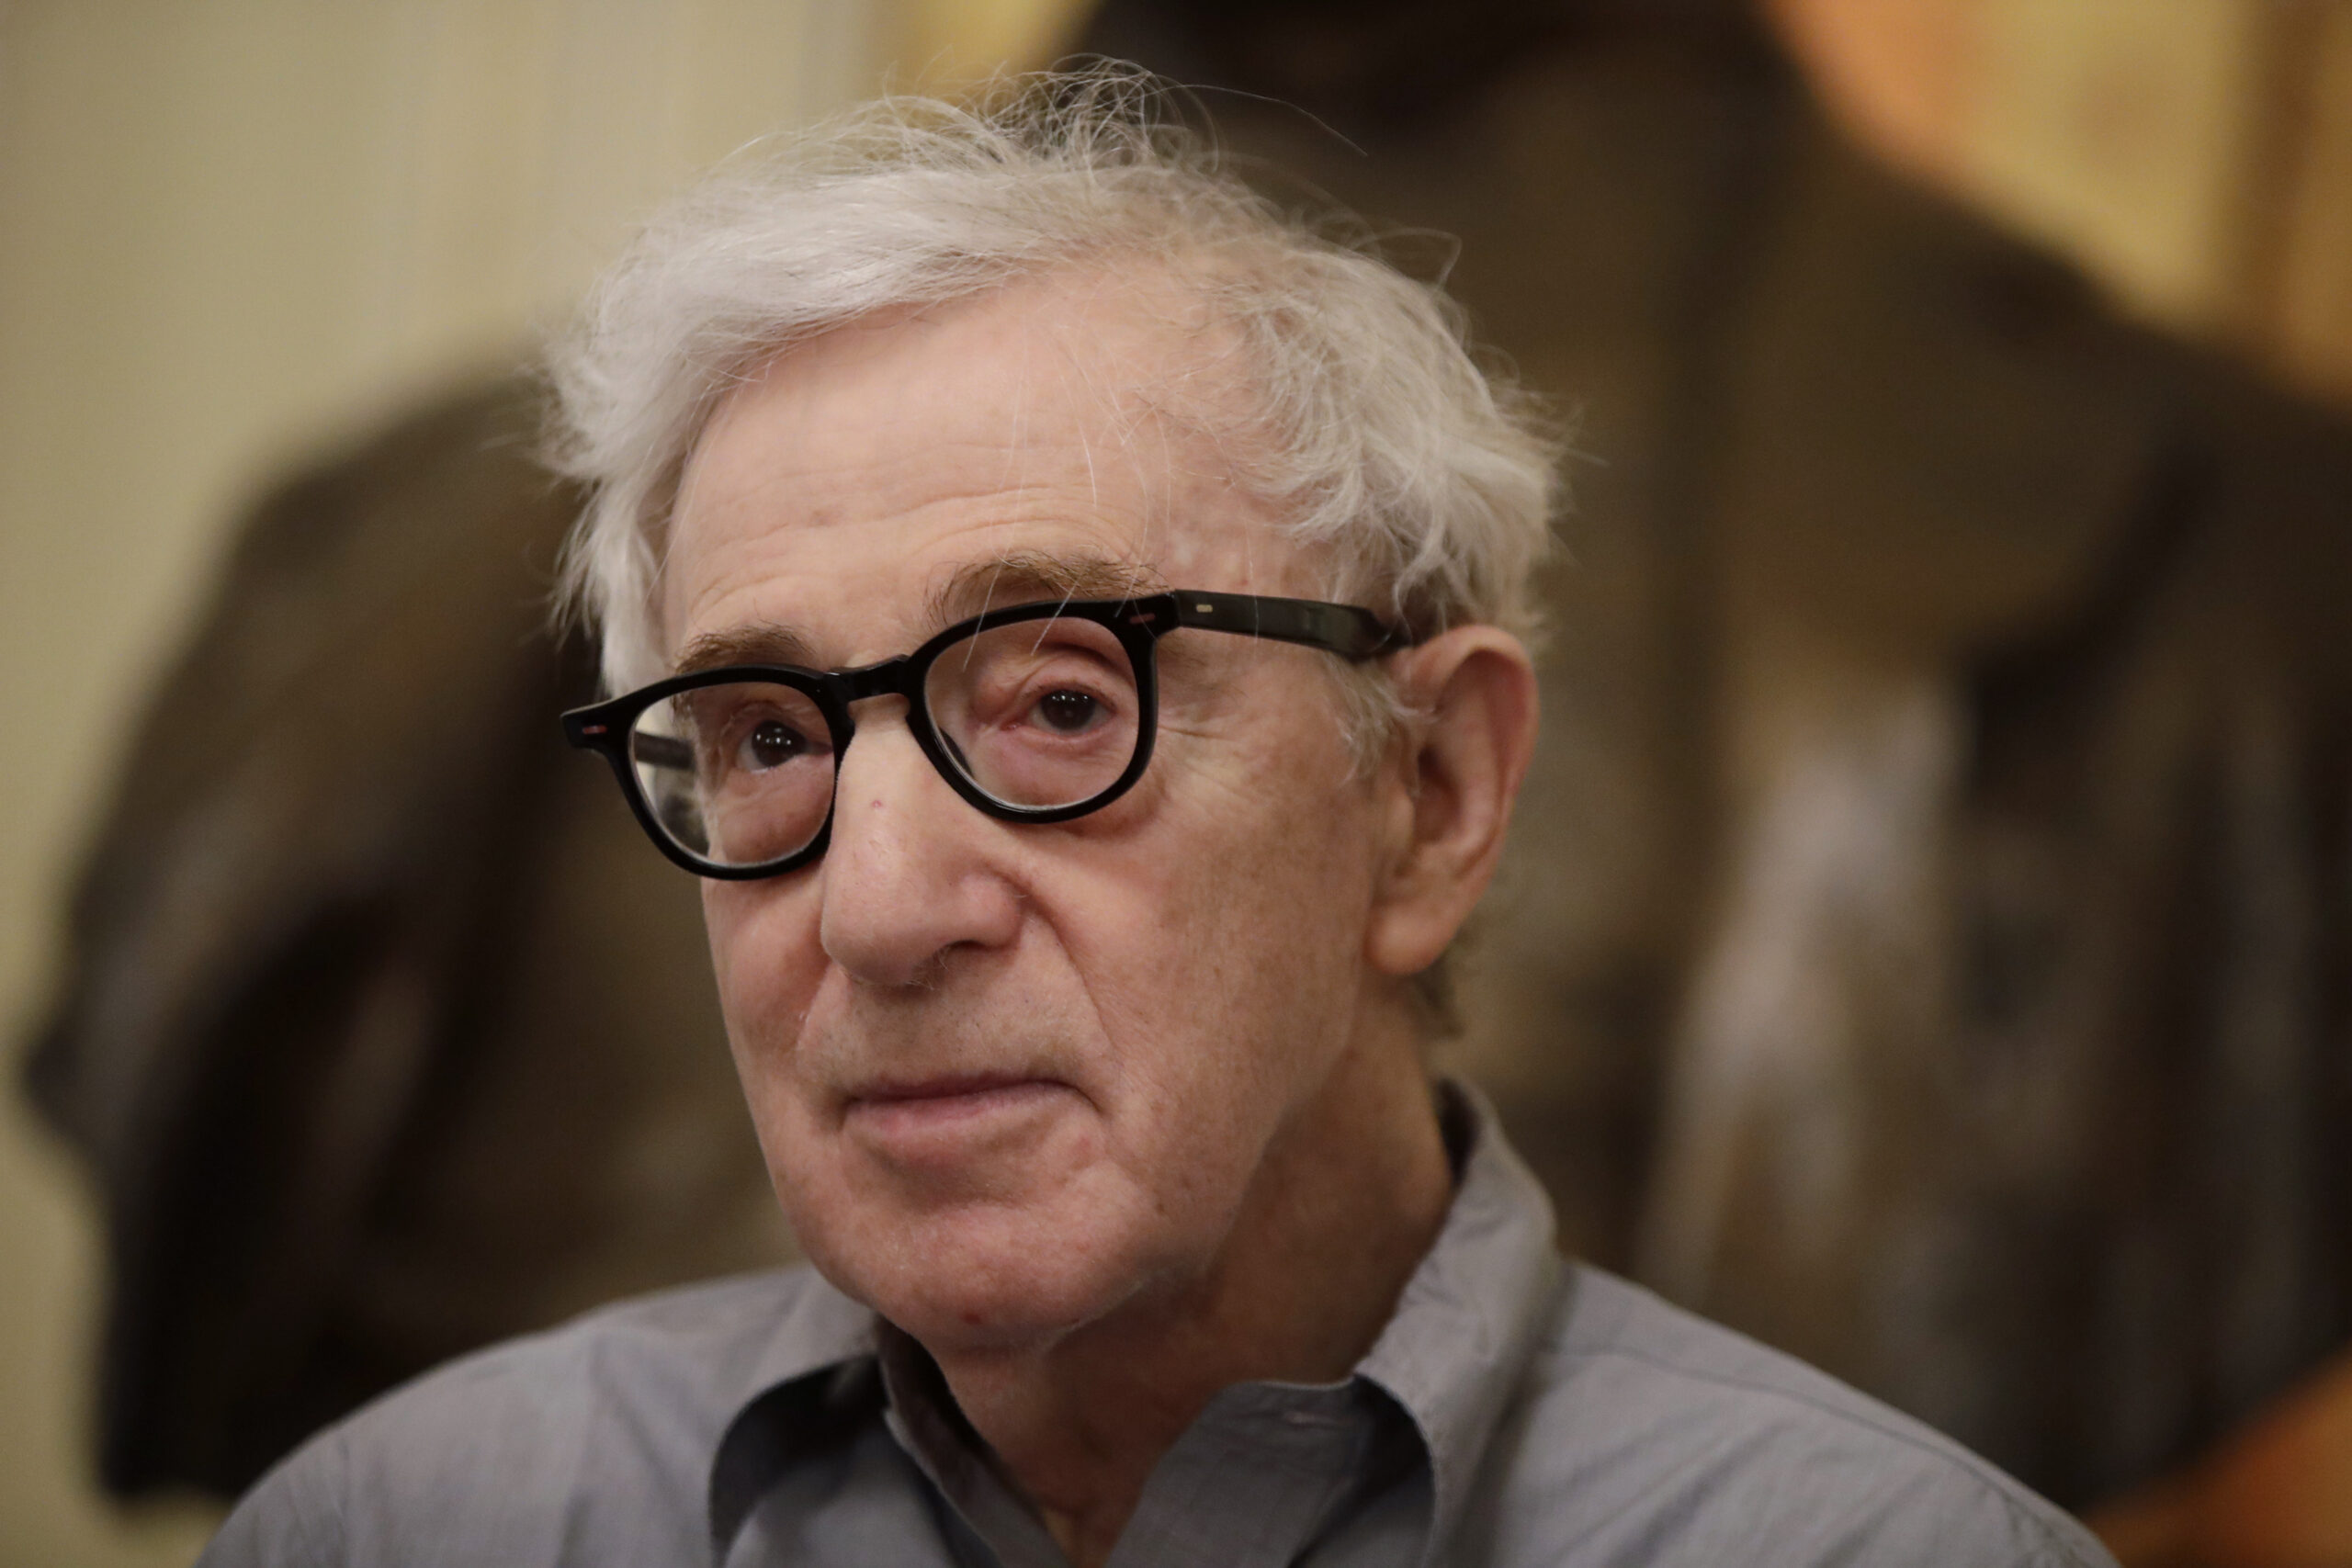 FILE - In this Tuesday, July 2, 2019 file photo, director Woody Allen attends a press conference at La Scala opera house, in Milan, Italy. The filmmaker had sued Amazon in February after the online giant ended his contract without ever releasing a completed film, "A Rainy Day in New York." Amazon had responded that Allen, whose daughter Dylan has accused him of molesting her, breached the deal by making insensitive remarks about the #MeToo movement. In papers filed Friday, Nov. 8, 2019, in U.S. District Court, Allen and Amazon agreed that the case should be dismissed without prejudice. (AP Photo/Luca Bruno)